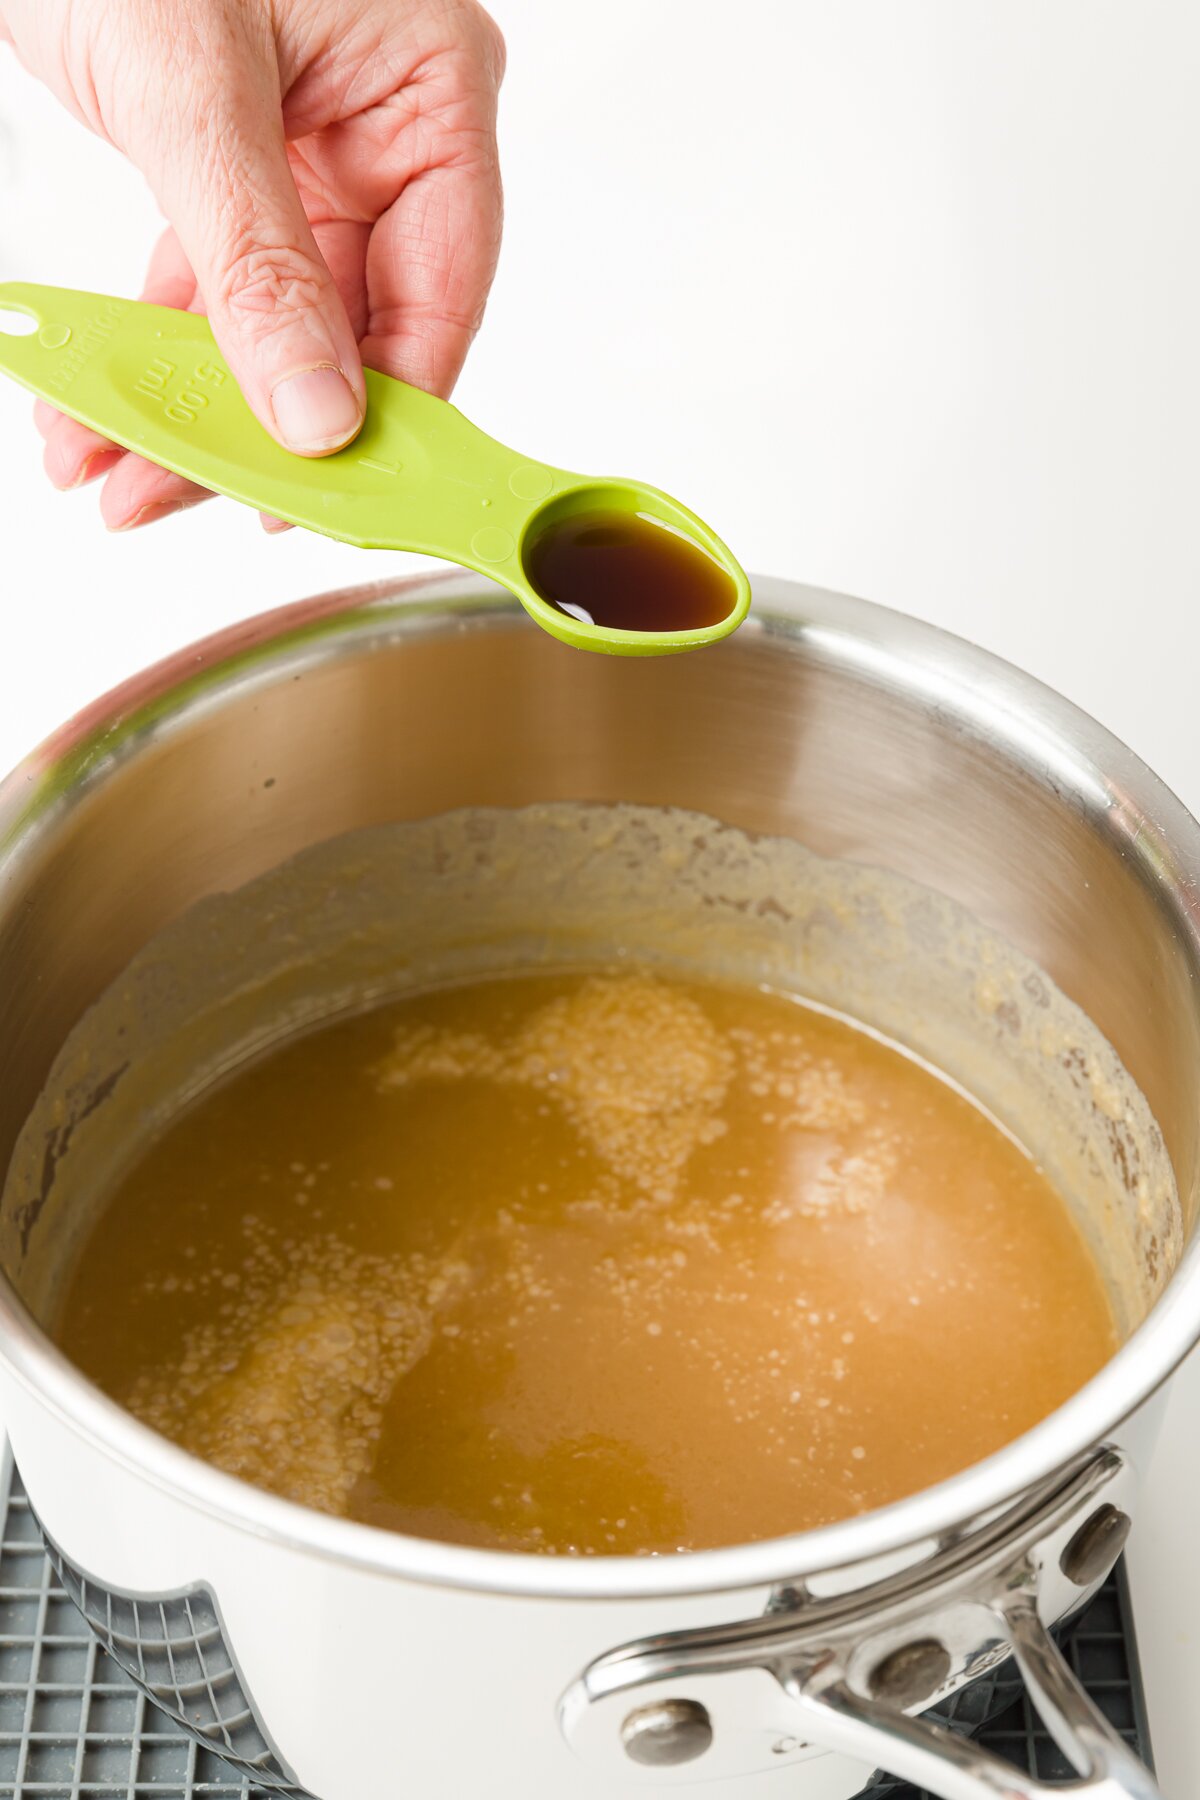 Adding vanilla in a green measuring spoon to pot of butterscotch sauce